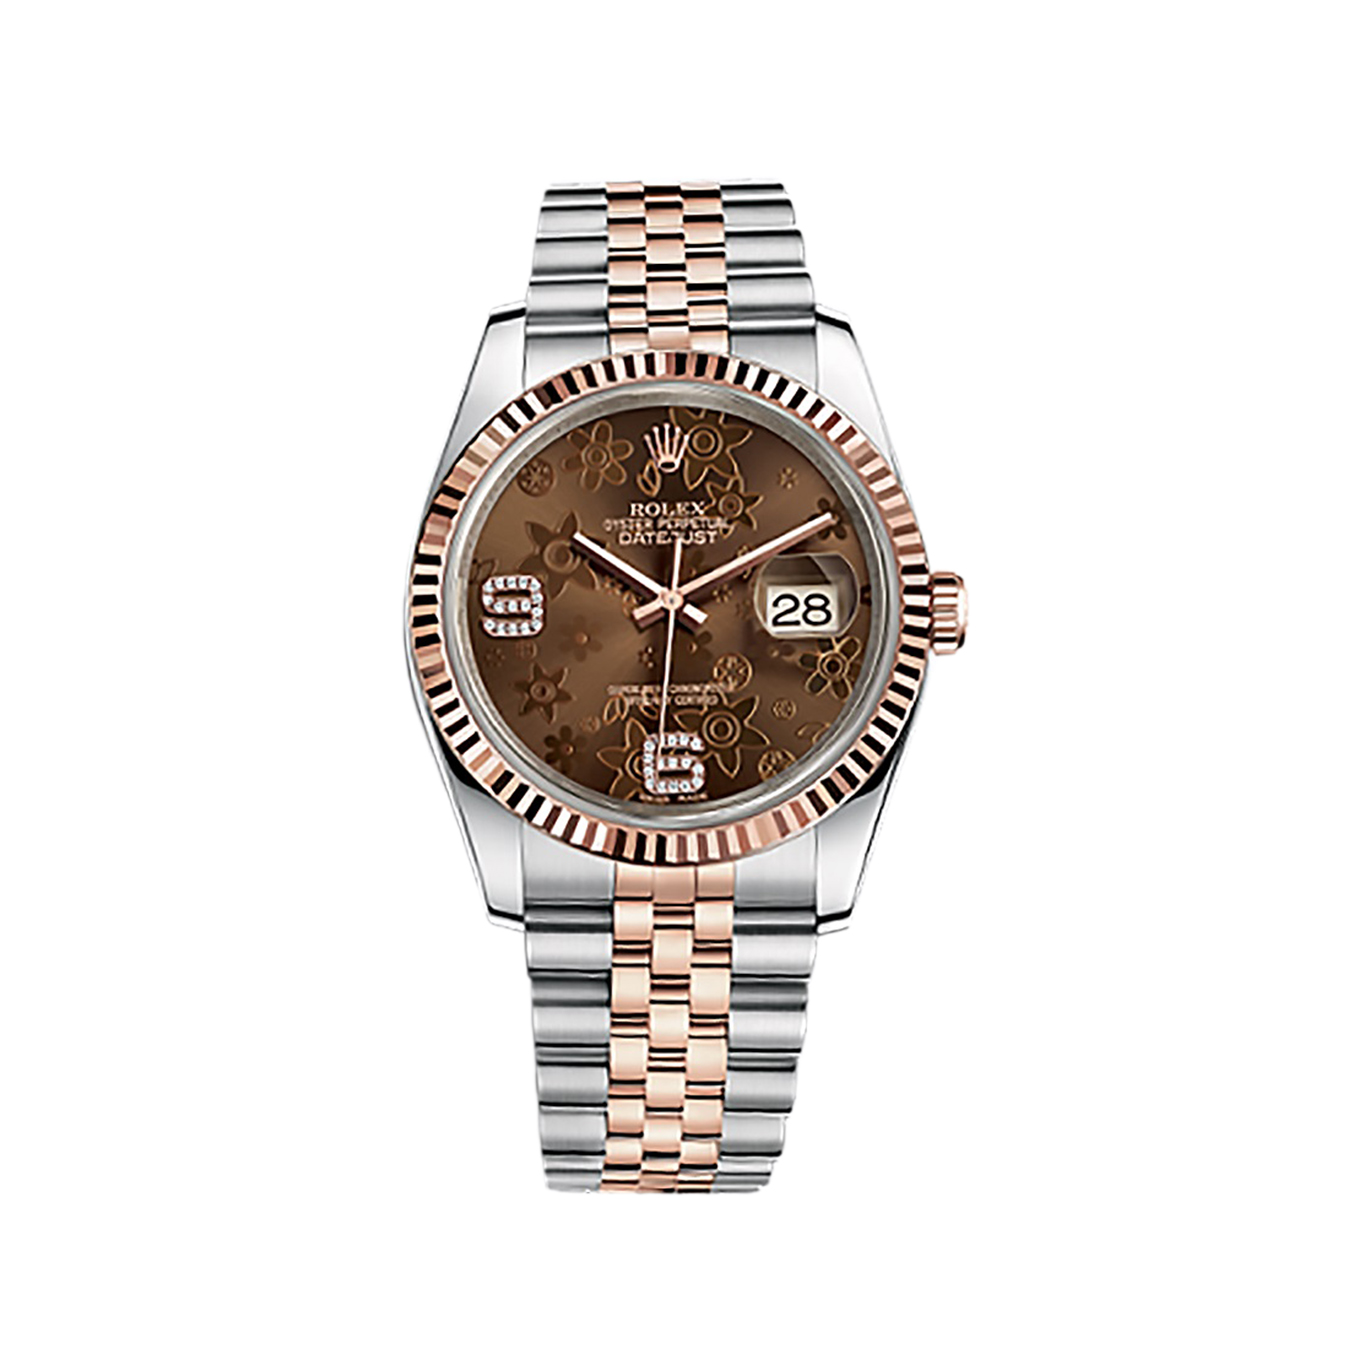 Datejust 36 116231 Rose Gold & Stainless Steel Watch (Chocolate Floral Motif Set with Diamonds)